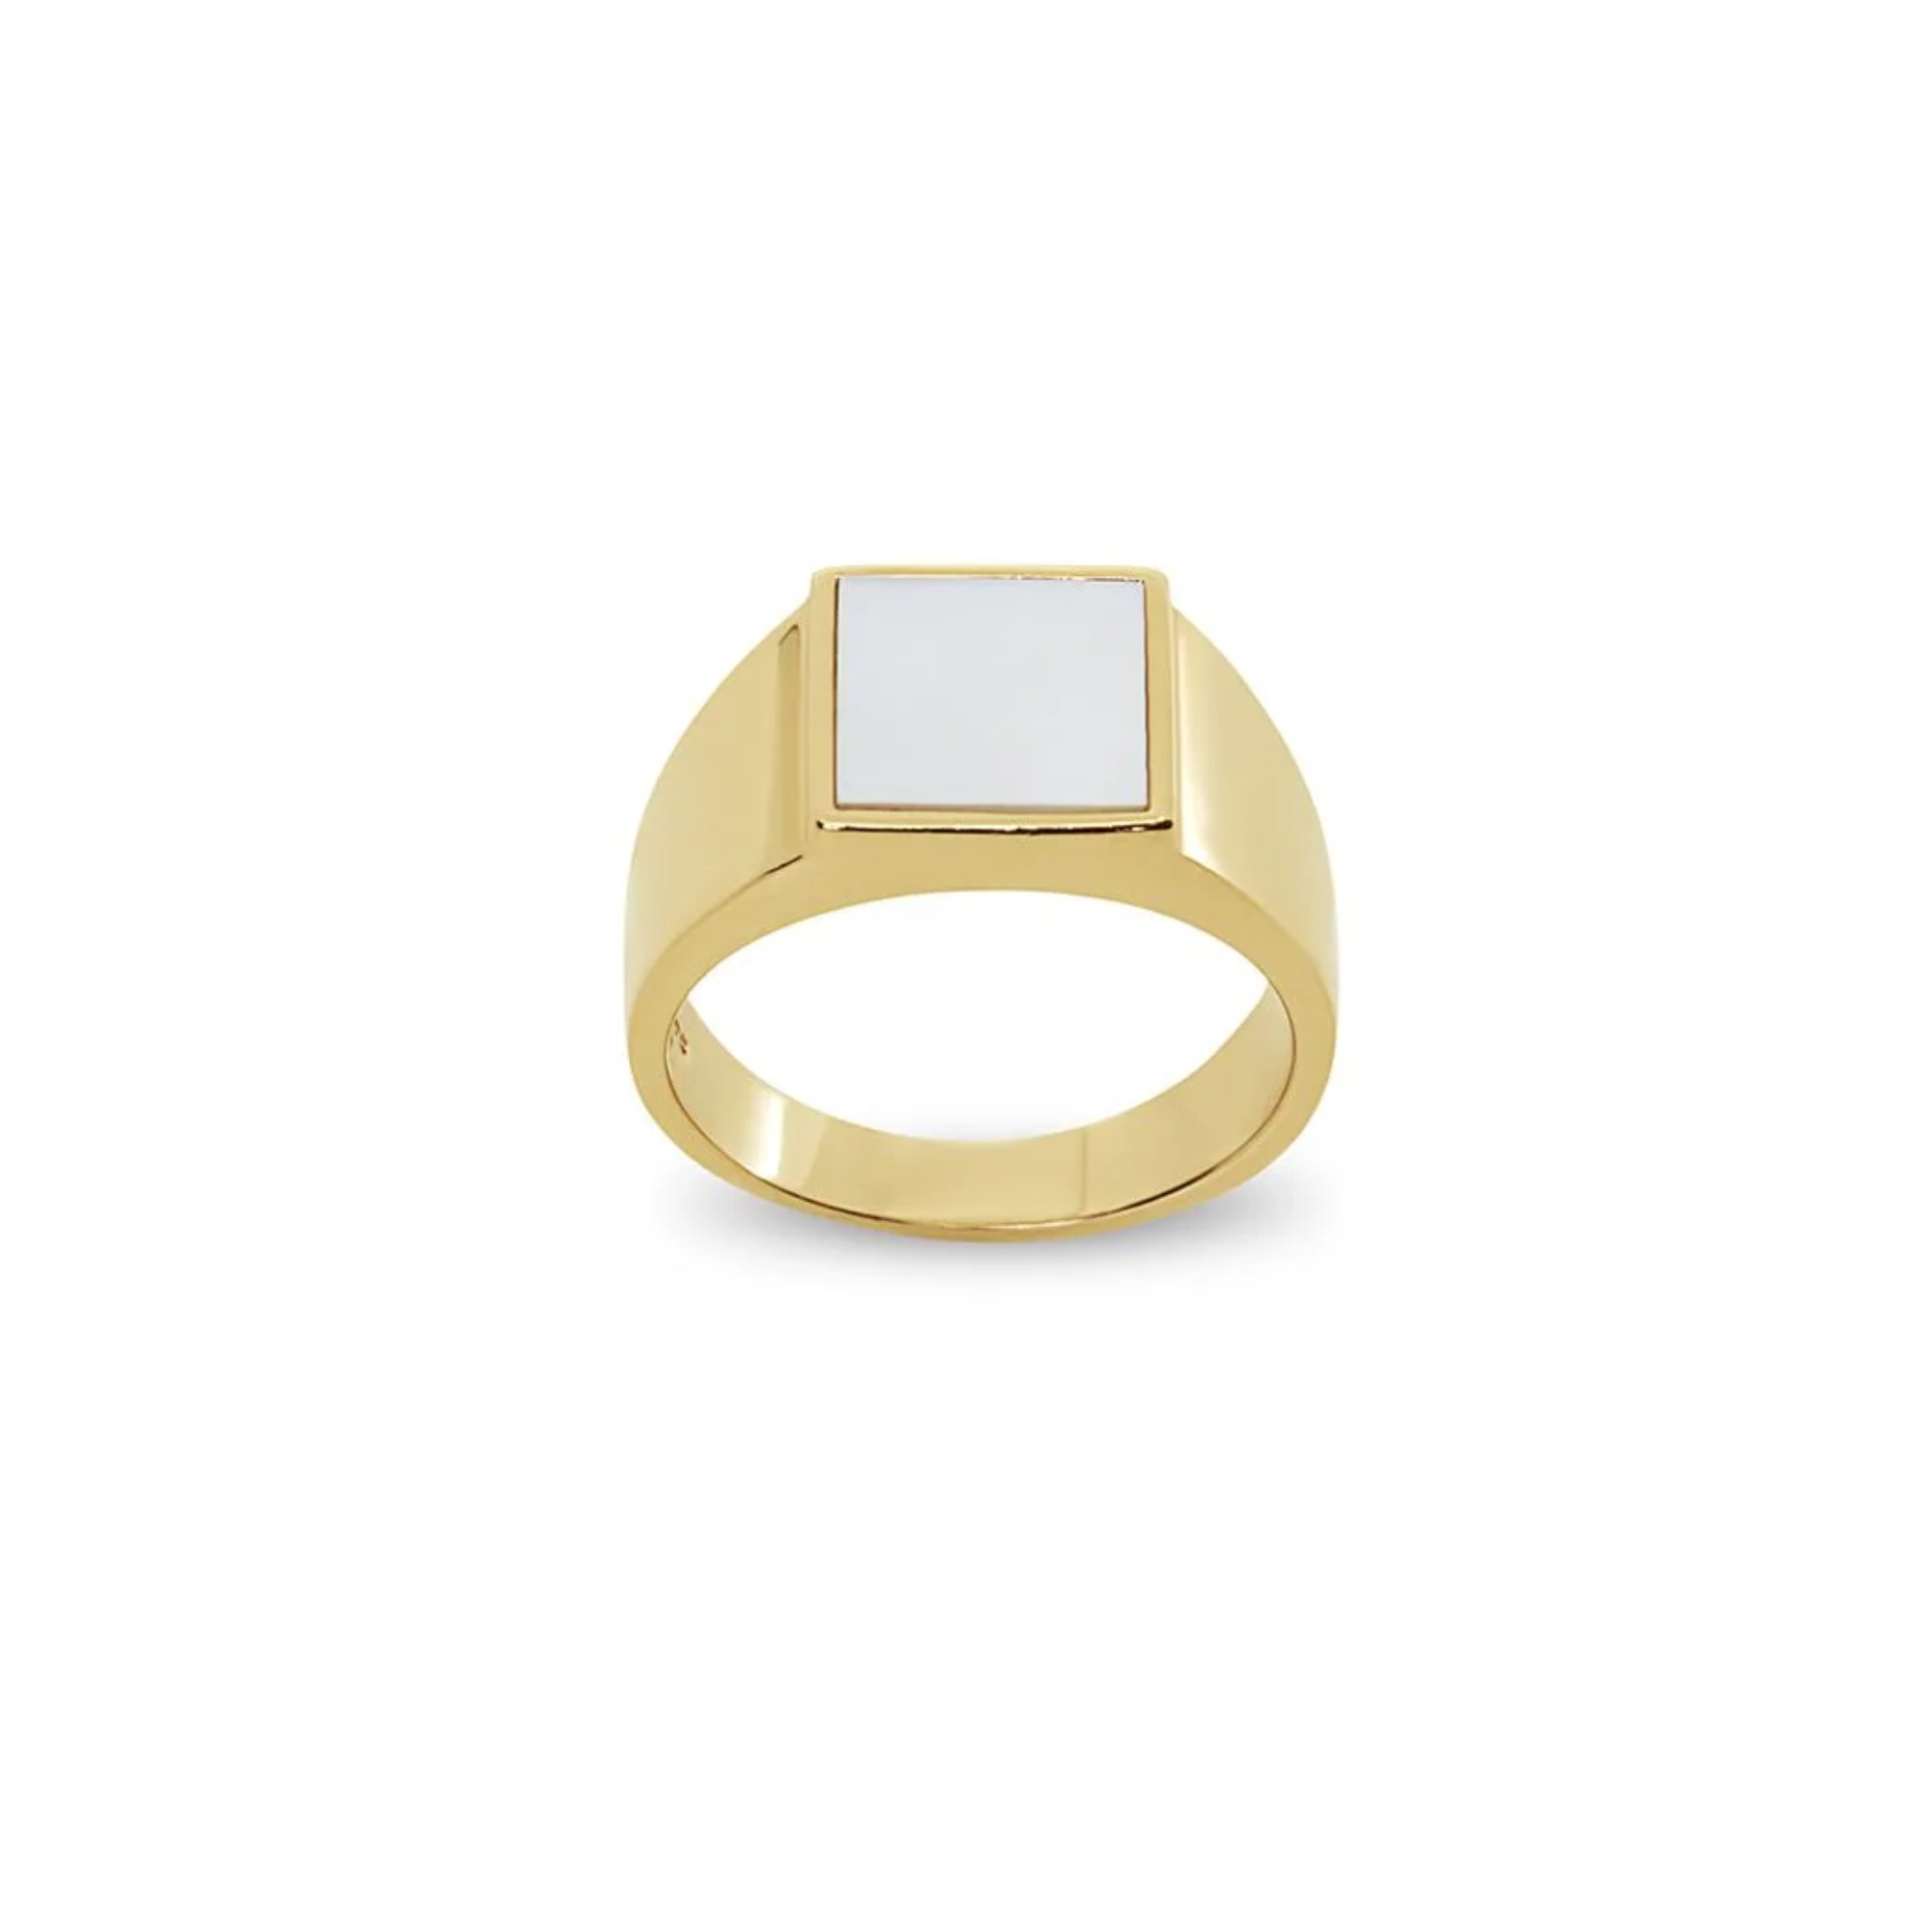 THE MOTHER OF PEARL SQUARE RING